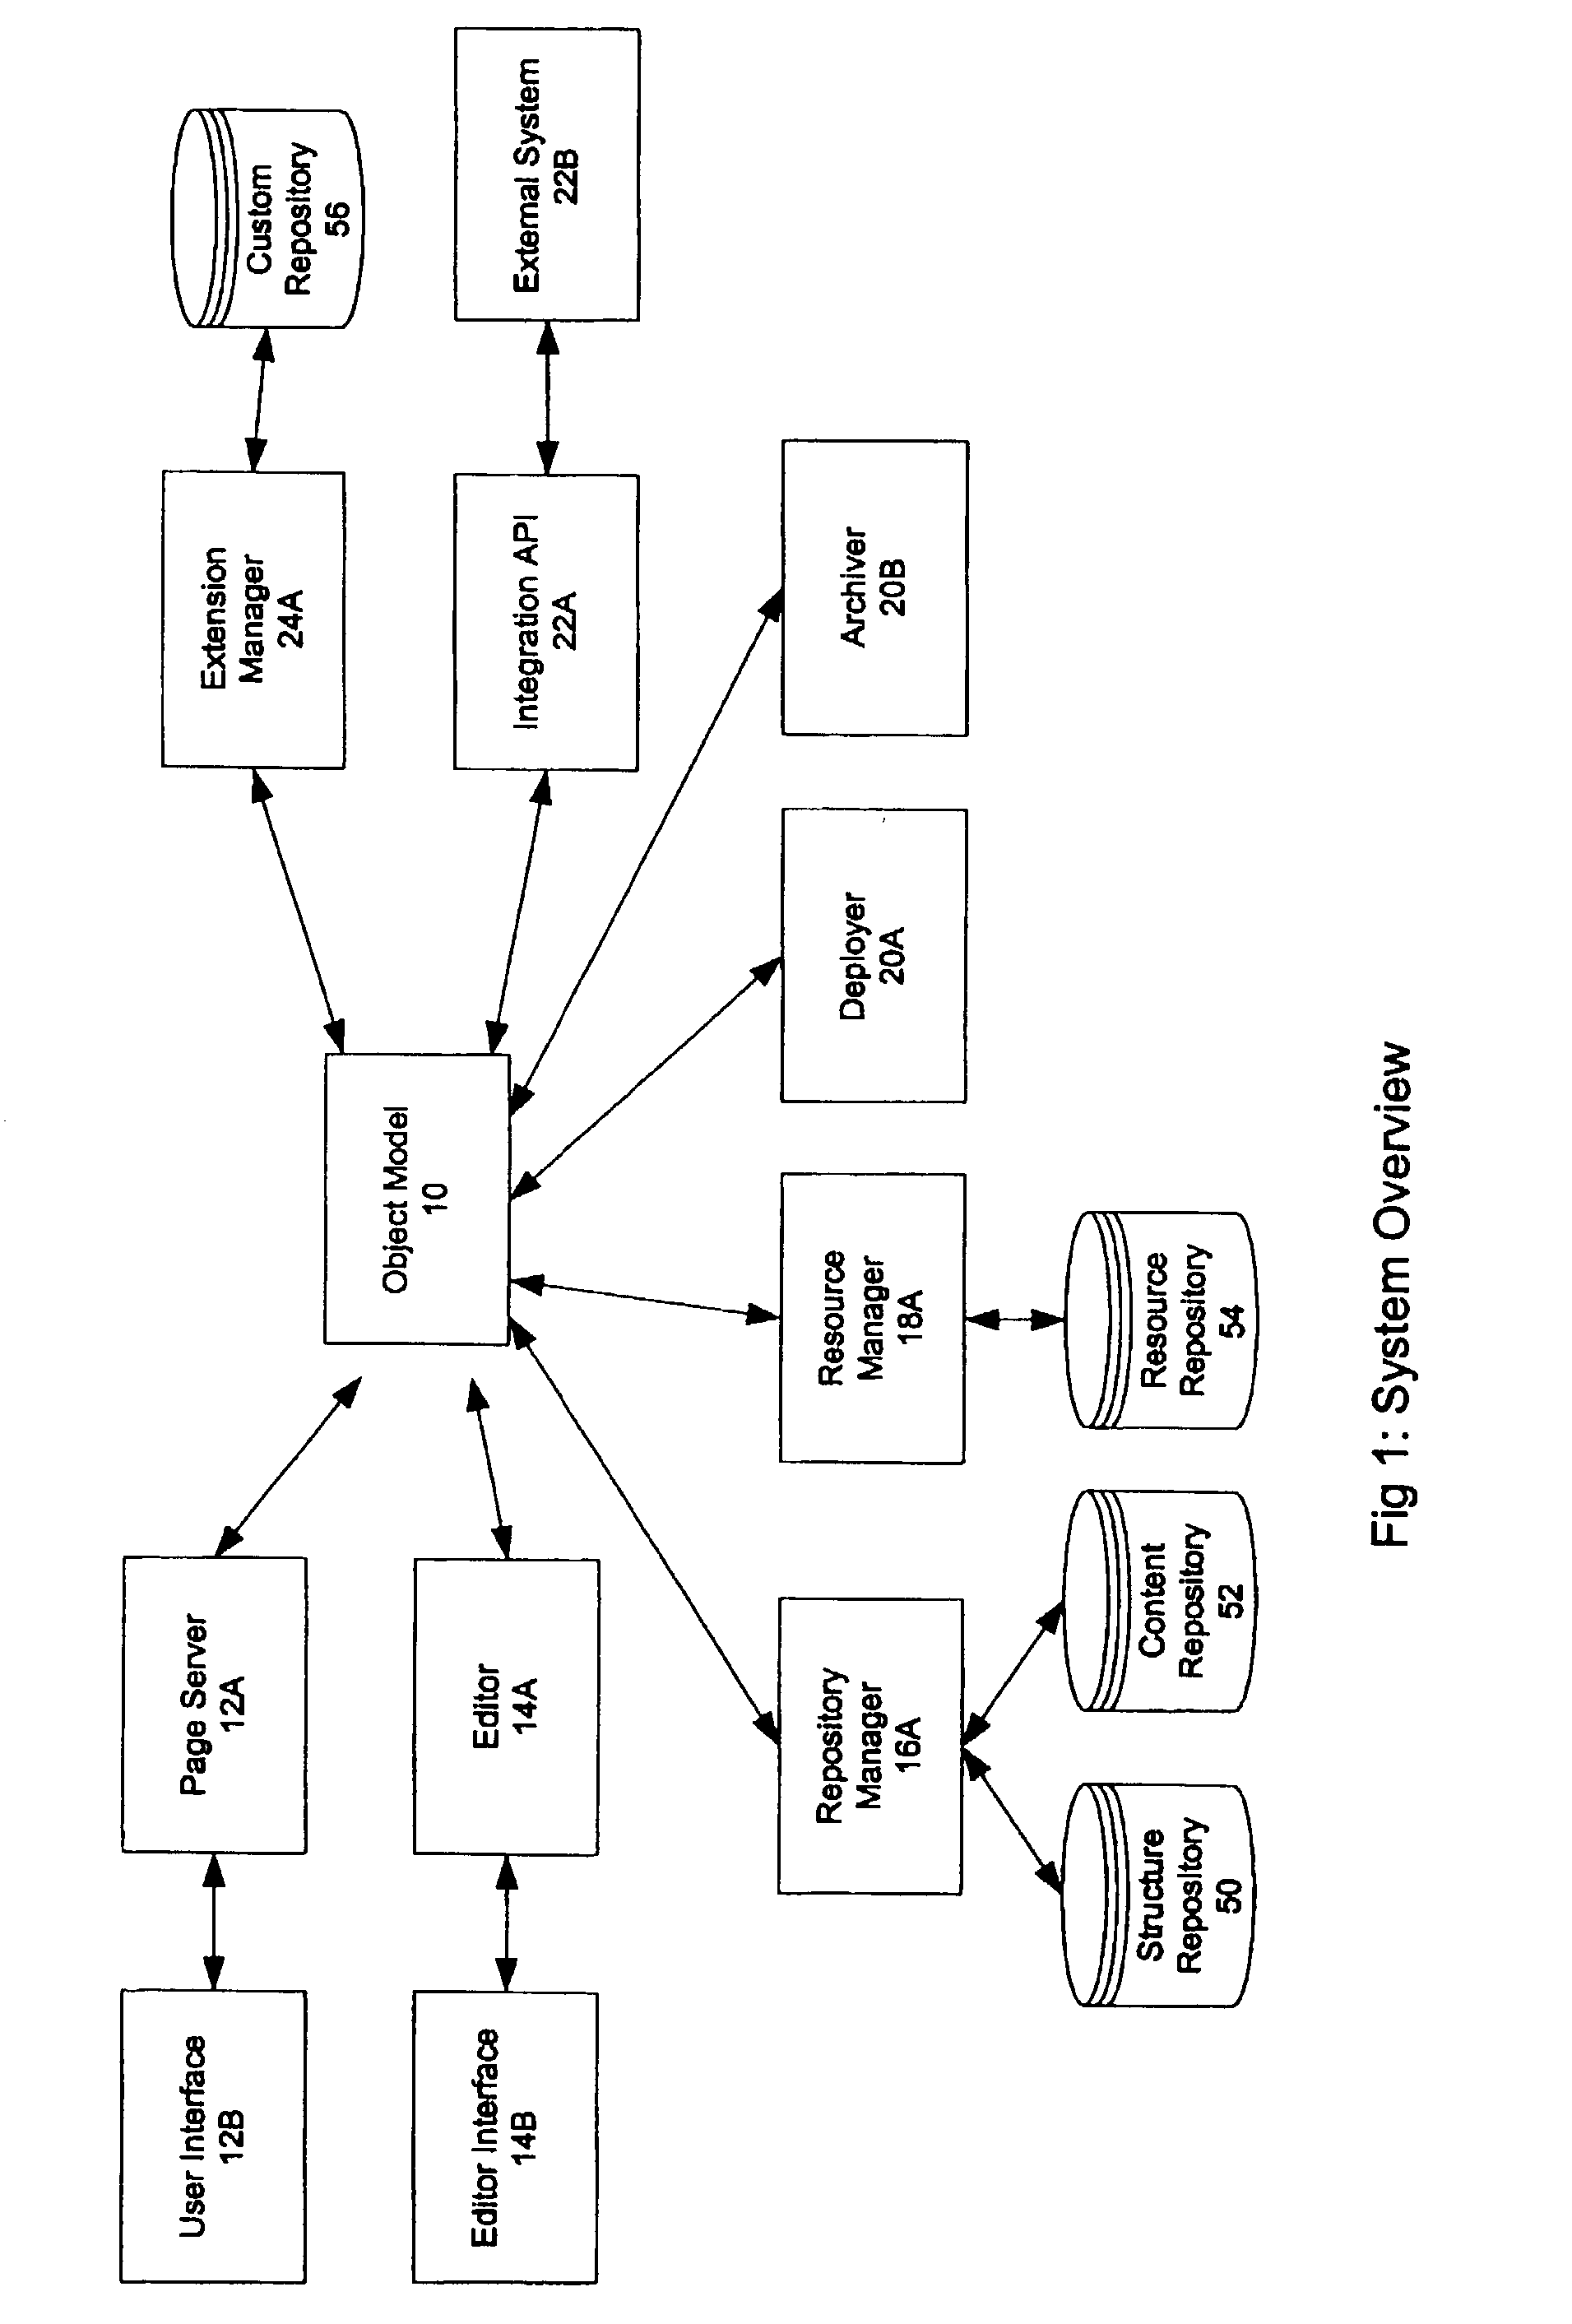 Web site application development method using object model for managing web-based content